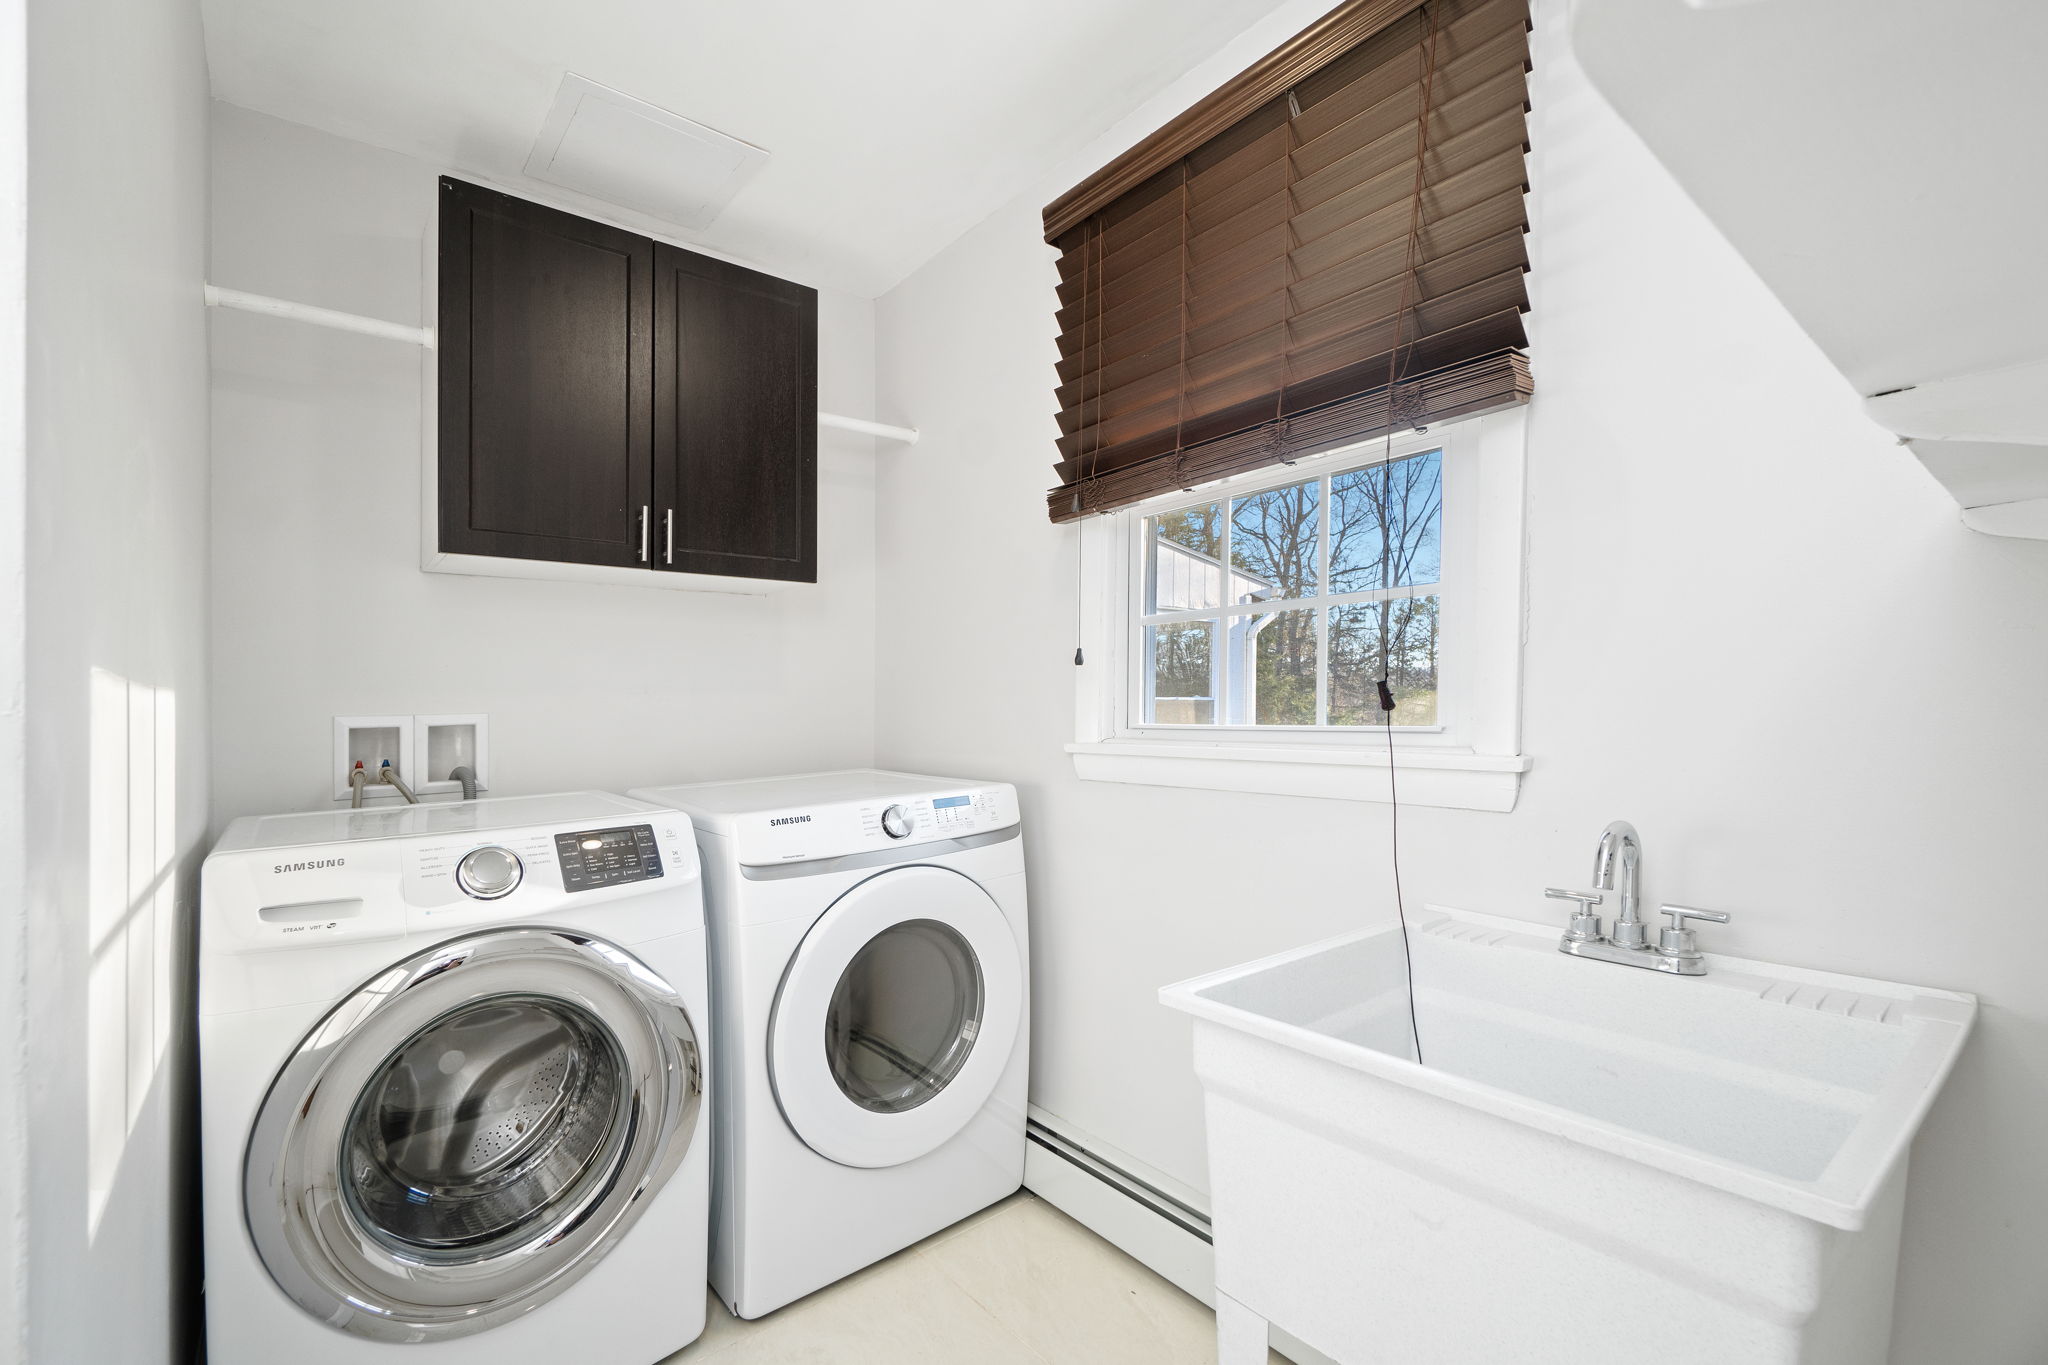 First floor laundry room